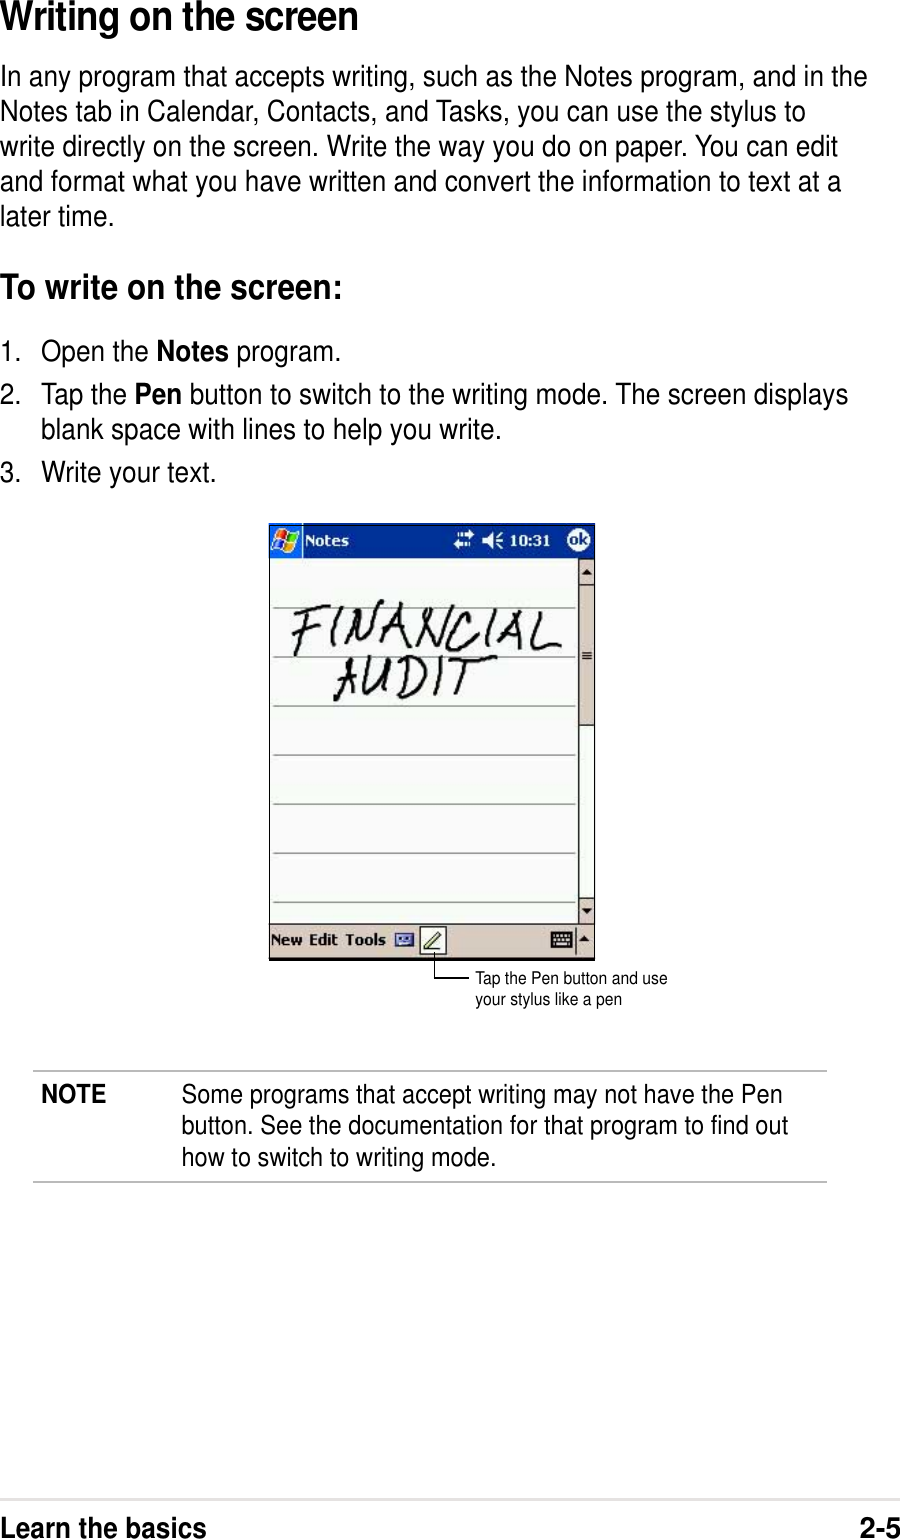 Learn the basics2-5Writing on the screenIn any program that accepts writing, such as the Notes program, and in theNotes tab in Calendar, Contacts, and Tasks, you can use the stylus towrite directly on the screen. Write the way you do on paper. You can editand format what you have written and convert the information to text at alater time.To write on the screen:1. Open the Notes program.2. Tap the Pen button to switch to the writing mode. The screen displaysblank space with lines to help you write.3. Write your text.NOTE Some programs that accept writing may not have the Penbutton. See the documentation for that program to find outhow to switch to writing mode.Tap the Pen button and useyour stylus like a pen